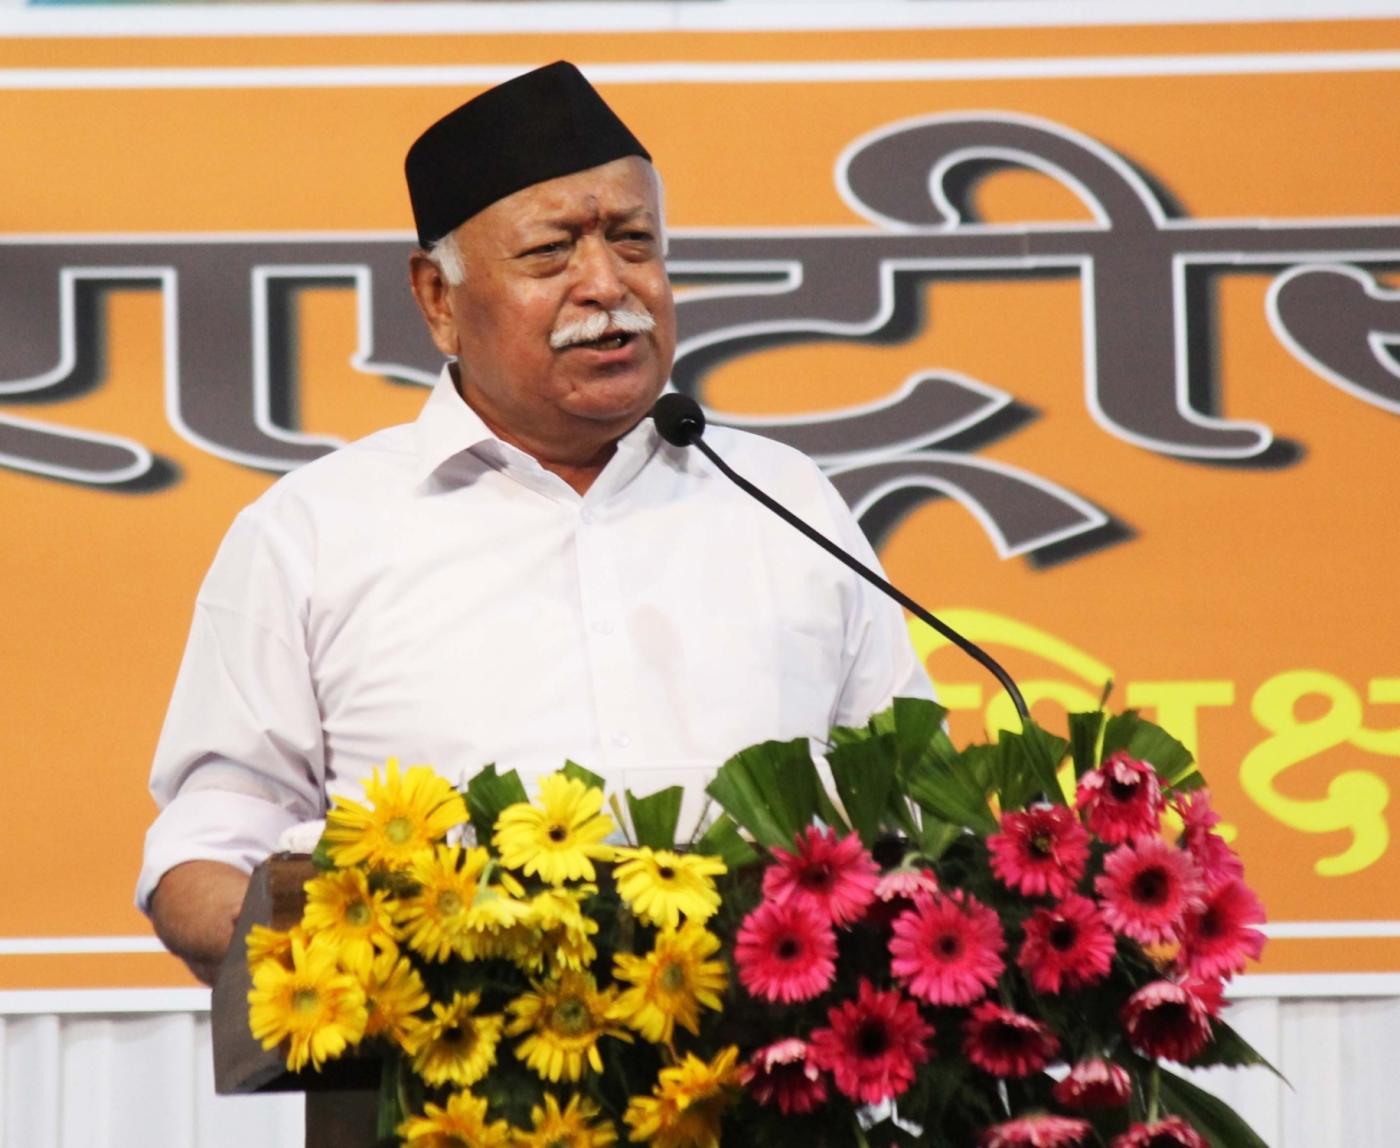 Nagpur: RSS chief Mohan Bhagwat addresses at the concluding function of "Tritiya Varsh Varg" in Nagpur on June 7, 2018. (Photo: IANS) by .